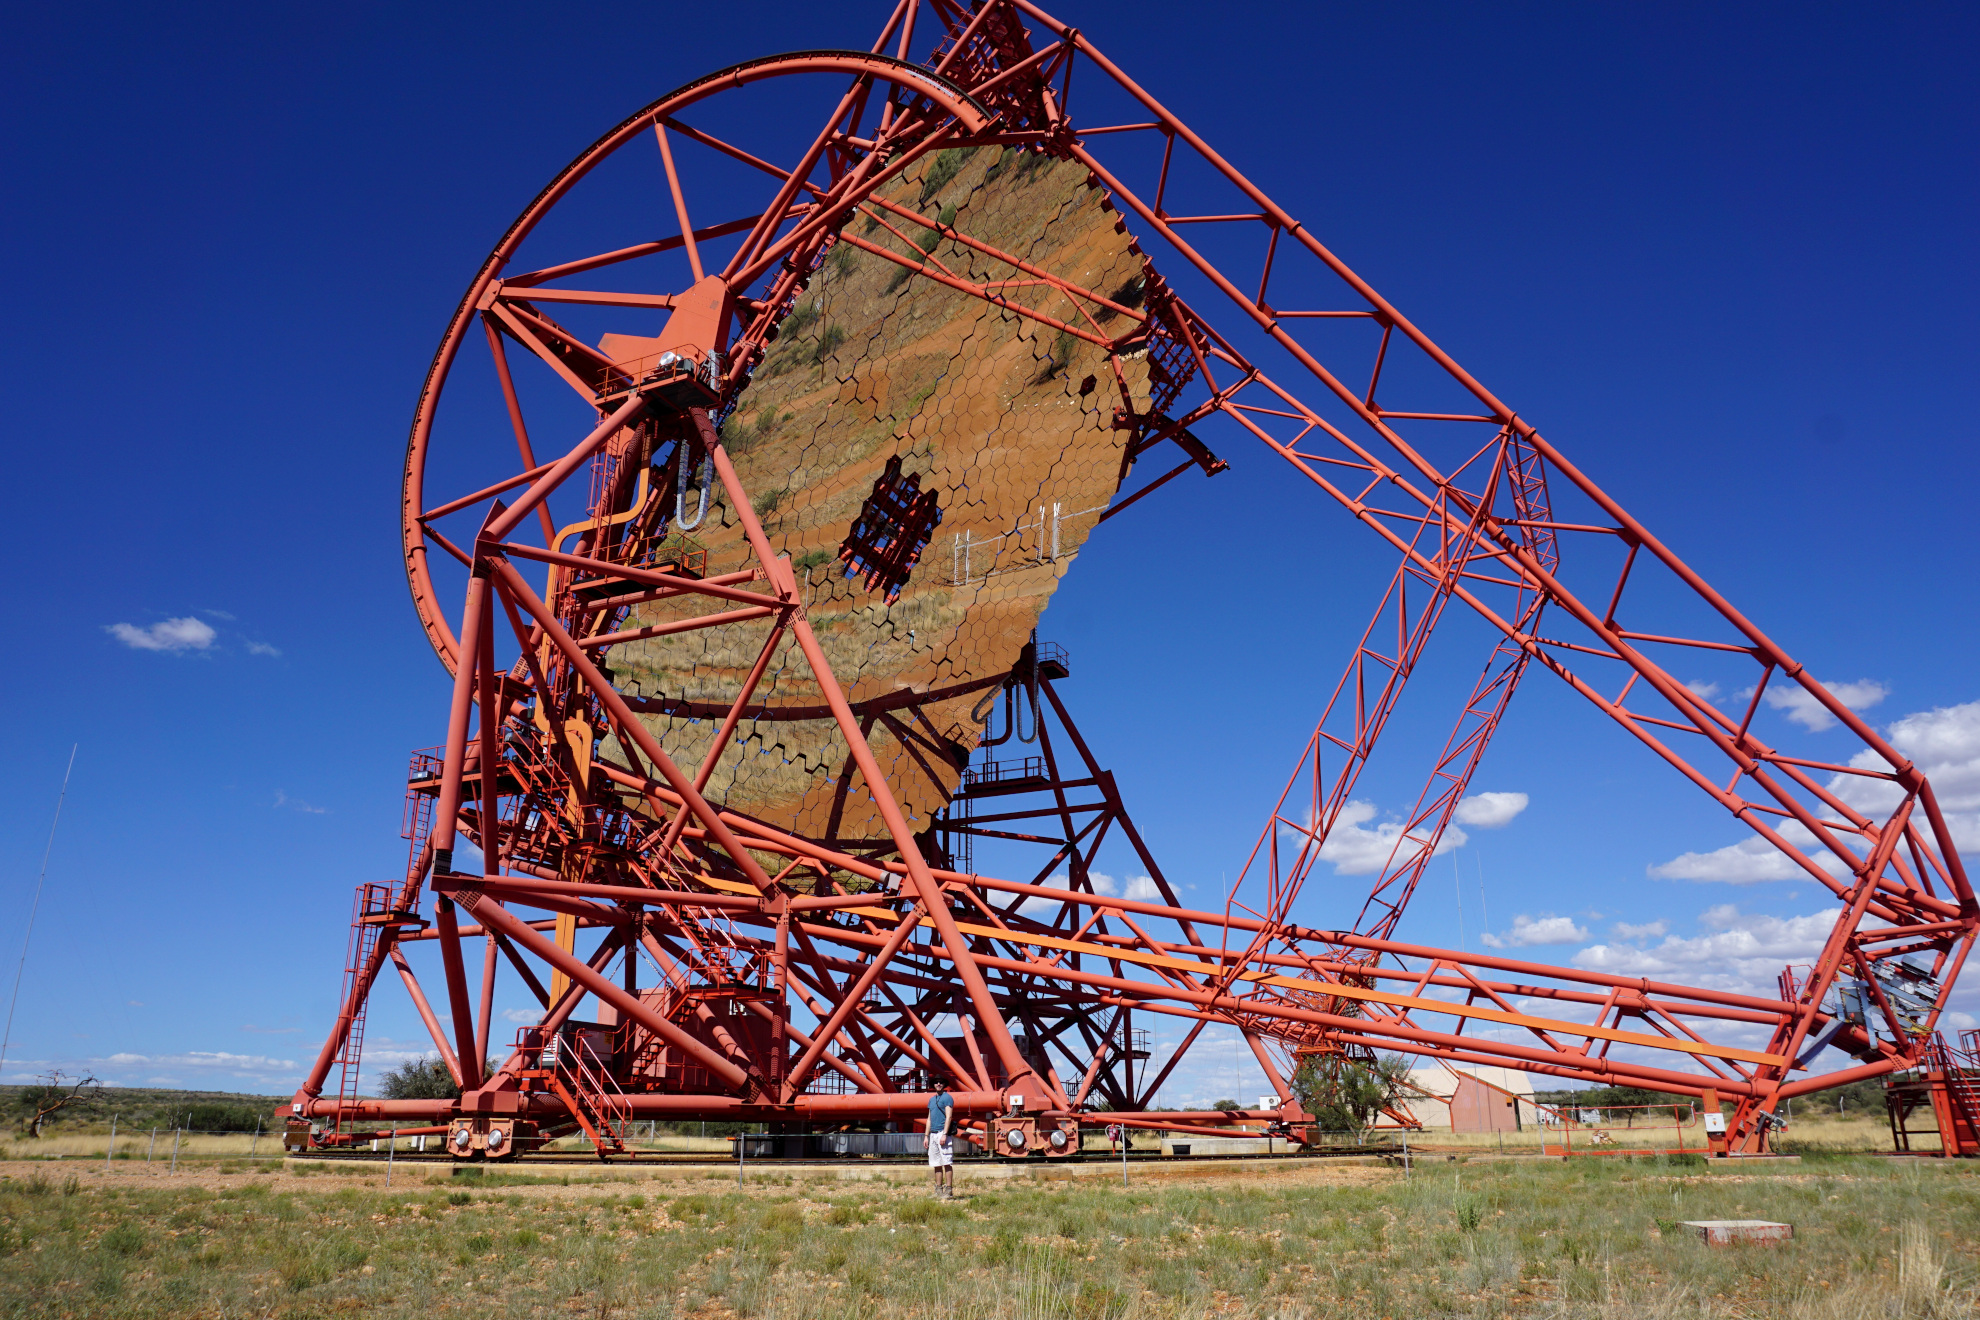 Gigantic red HESS telescope with me (tiny human) at the front of it. I’m barely visible due to the sheer size of the telescope